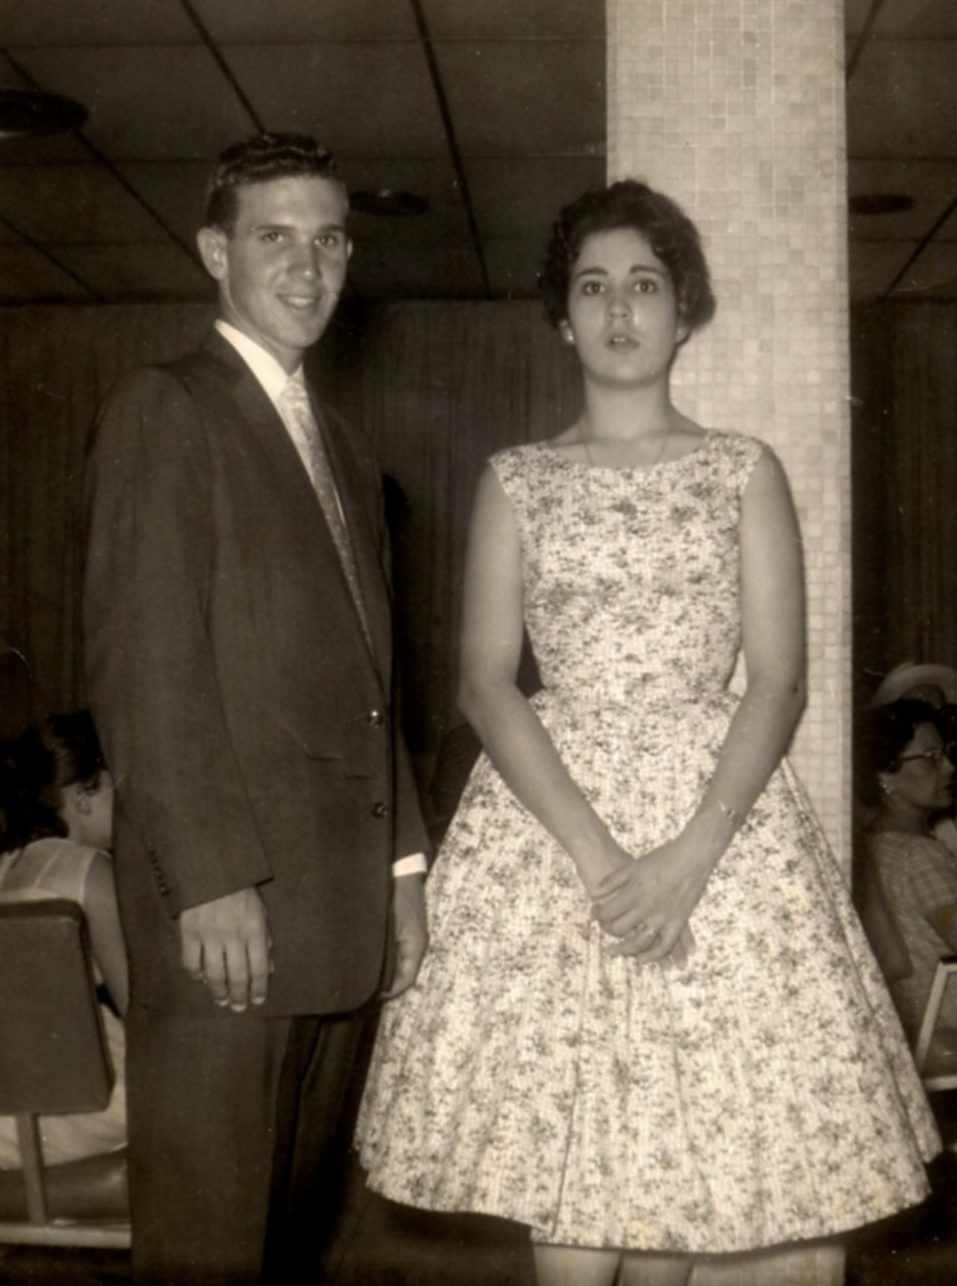 Black and white photo of a young woman, Marilu Espinosa, and her brother standing together.